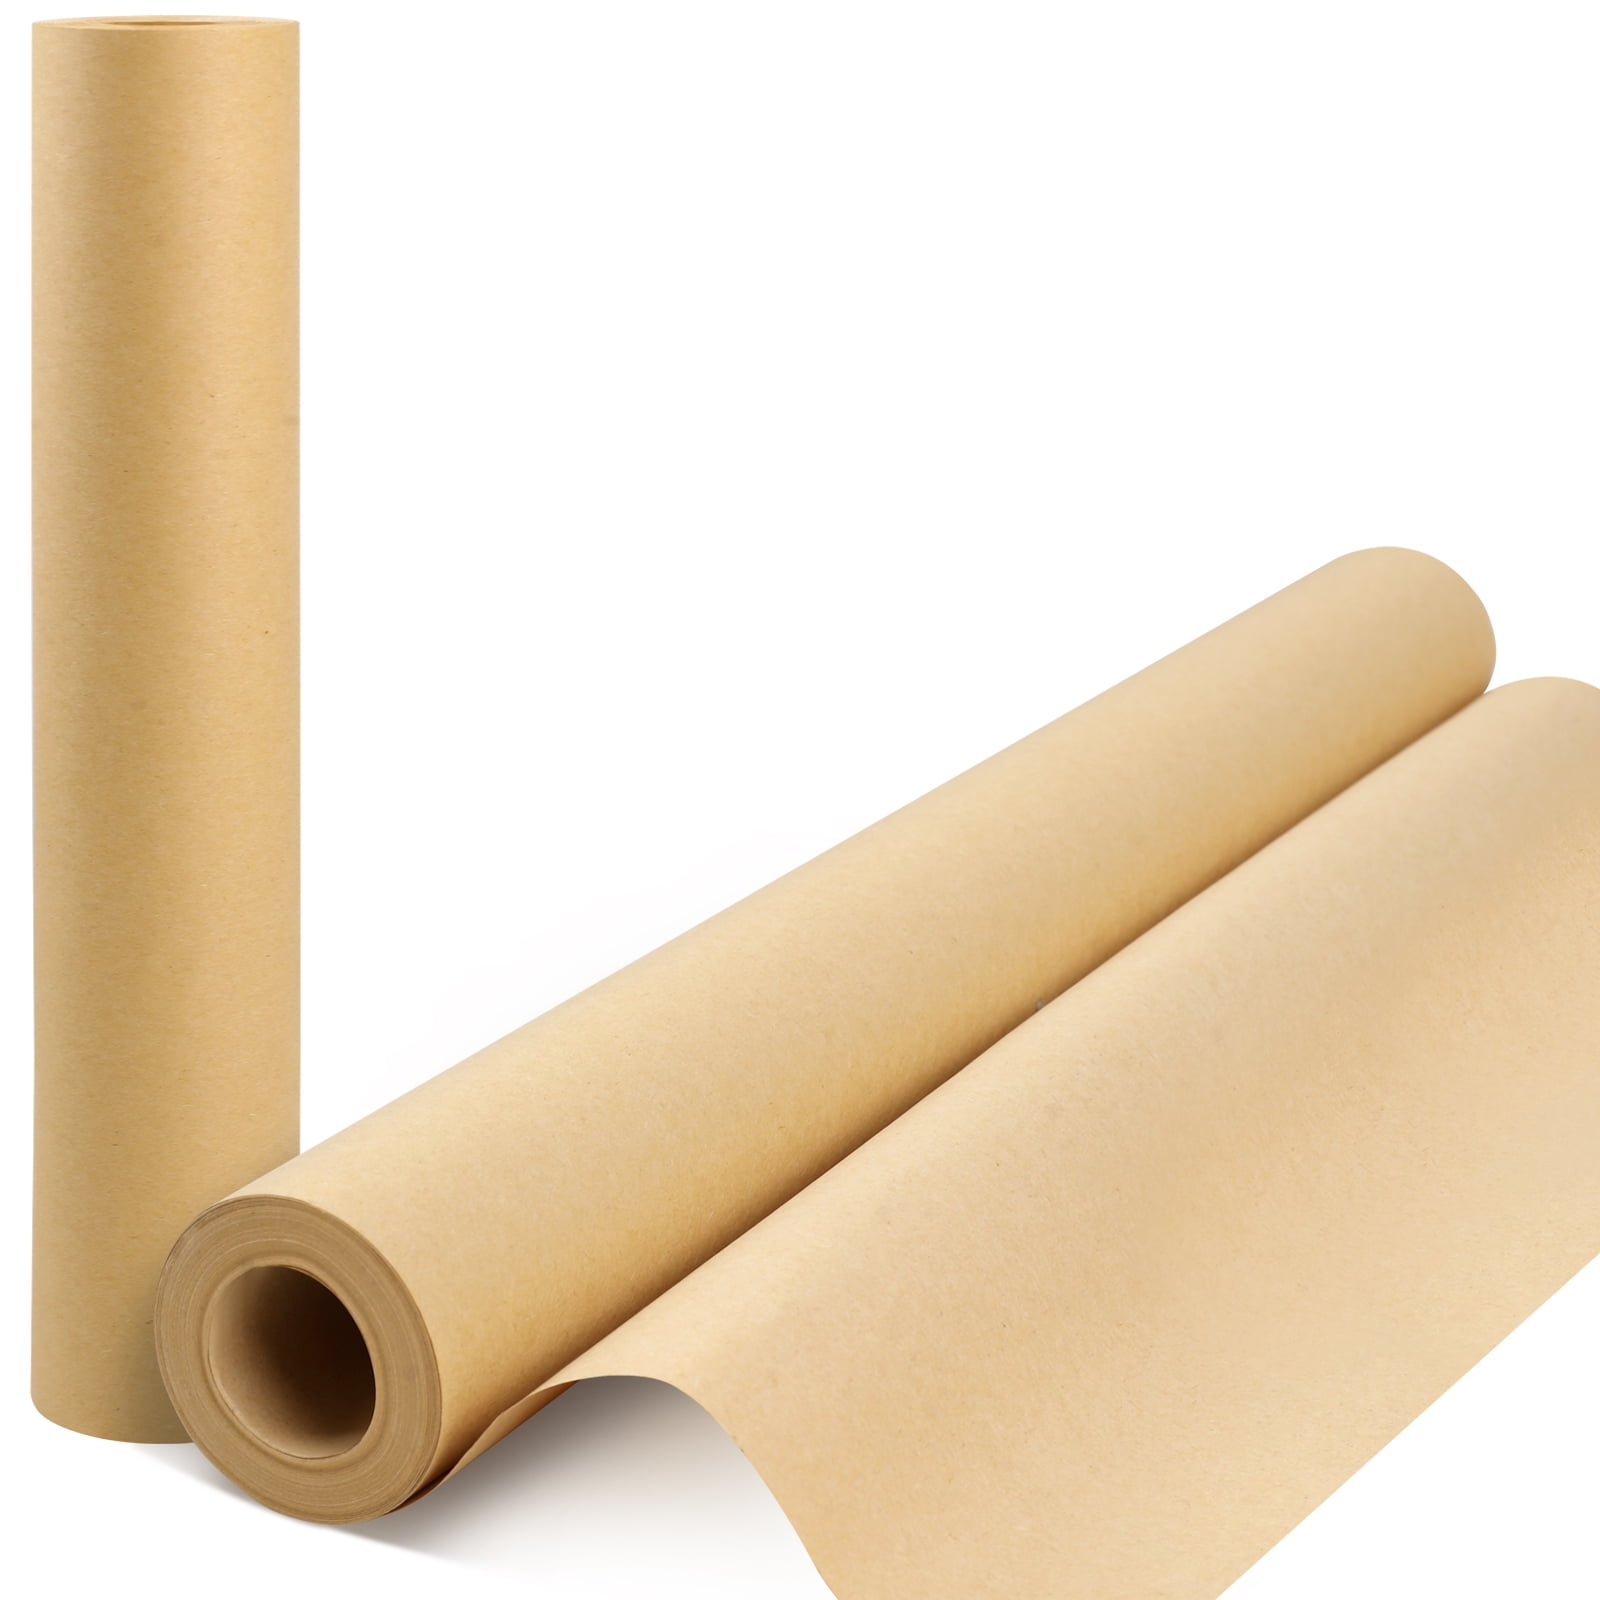 Brown Paper Roll 15400, Brown Wrapping Paper, Wrapping Paper, Craft  Paper, Packing Paper for Moving, Packing, Gift Wrapping, Wall Art, Table  Runner